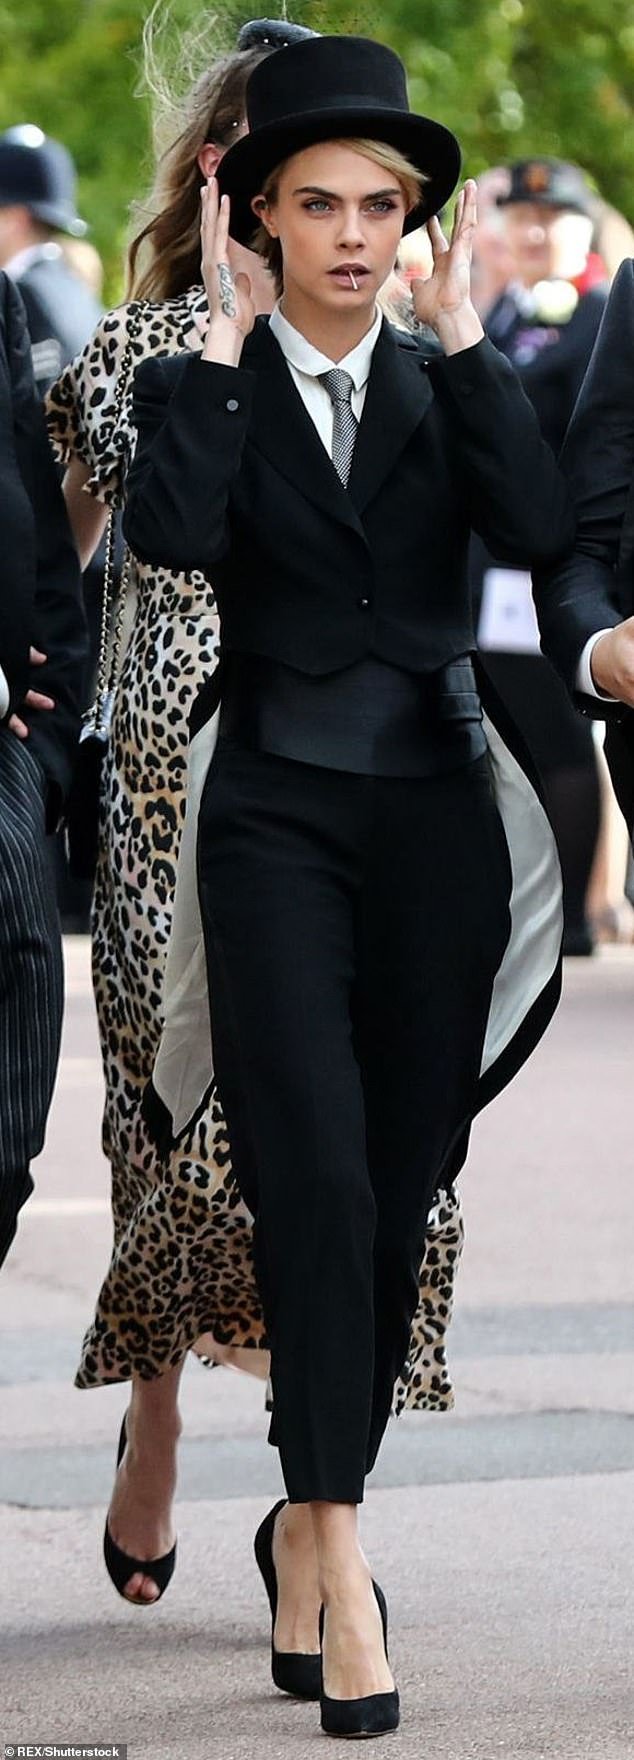 Cara Delevingne, invited to Princess Eugenie's wedding in 2018, put the royal bride on full display by wearing a top hat and tails